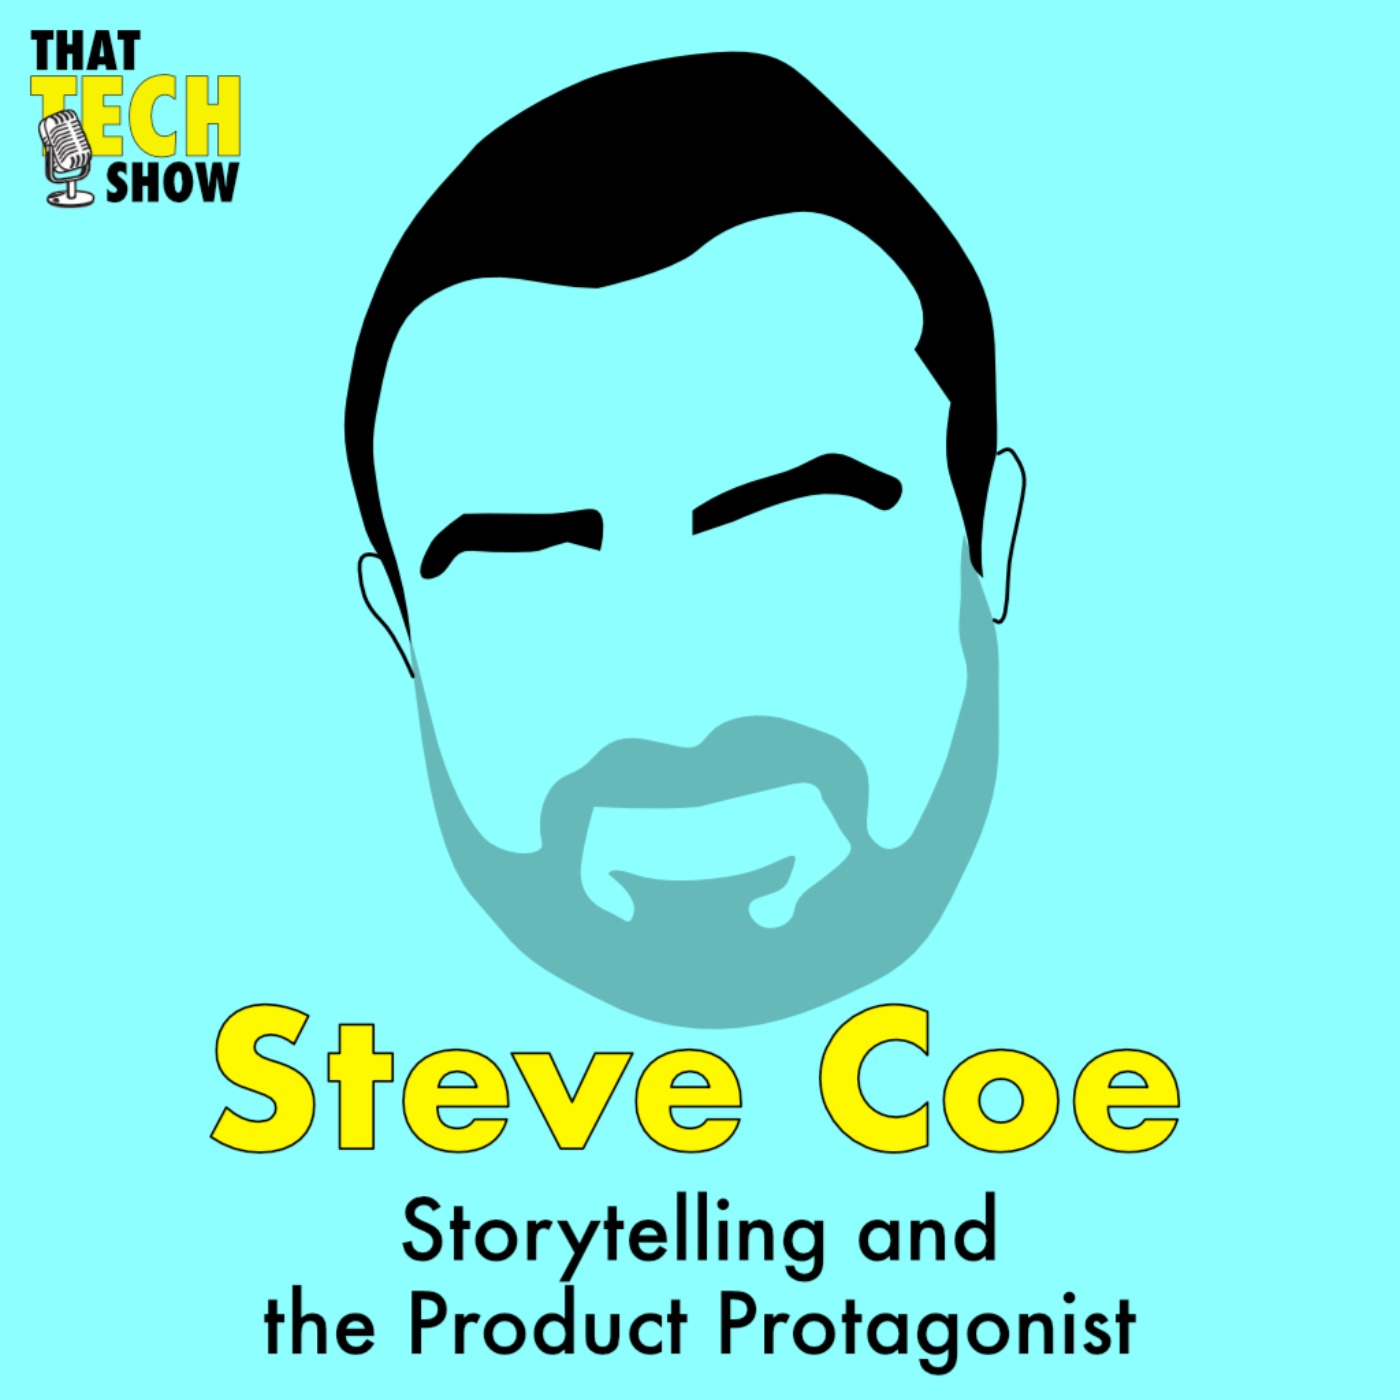 Episode 29 - Storytelling and the Product Protagonist with Steve Coe